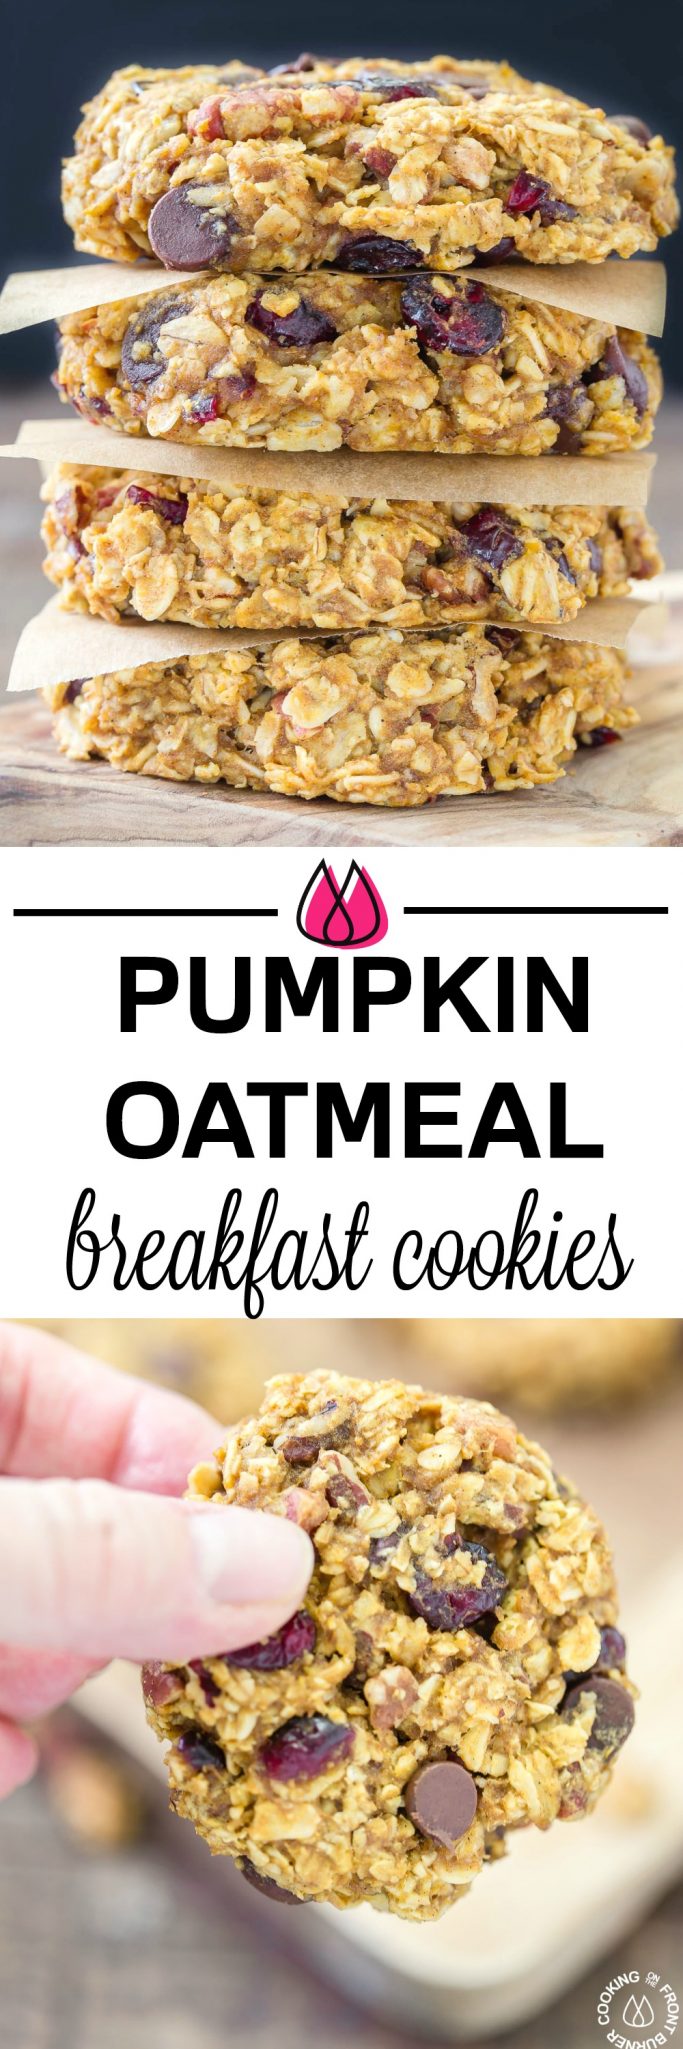 These grab-n-go Pumpkin Oat Breakfast Cookies are easy to make with good for you oats, pumpkin, a bit of chocolate, pecans and dried cranberries. Make ahead for those times when you are in a hurry but want something healthy to fuel your day!